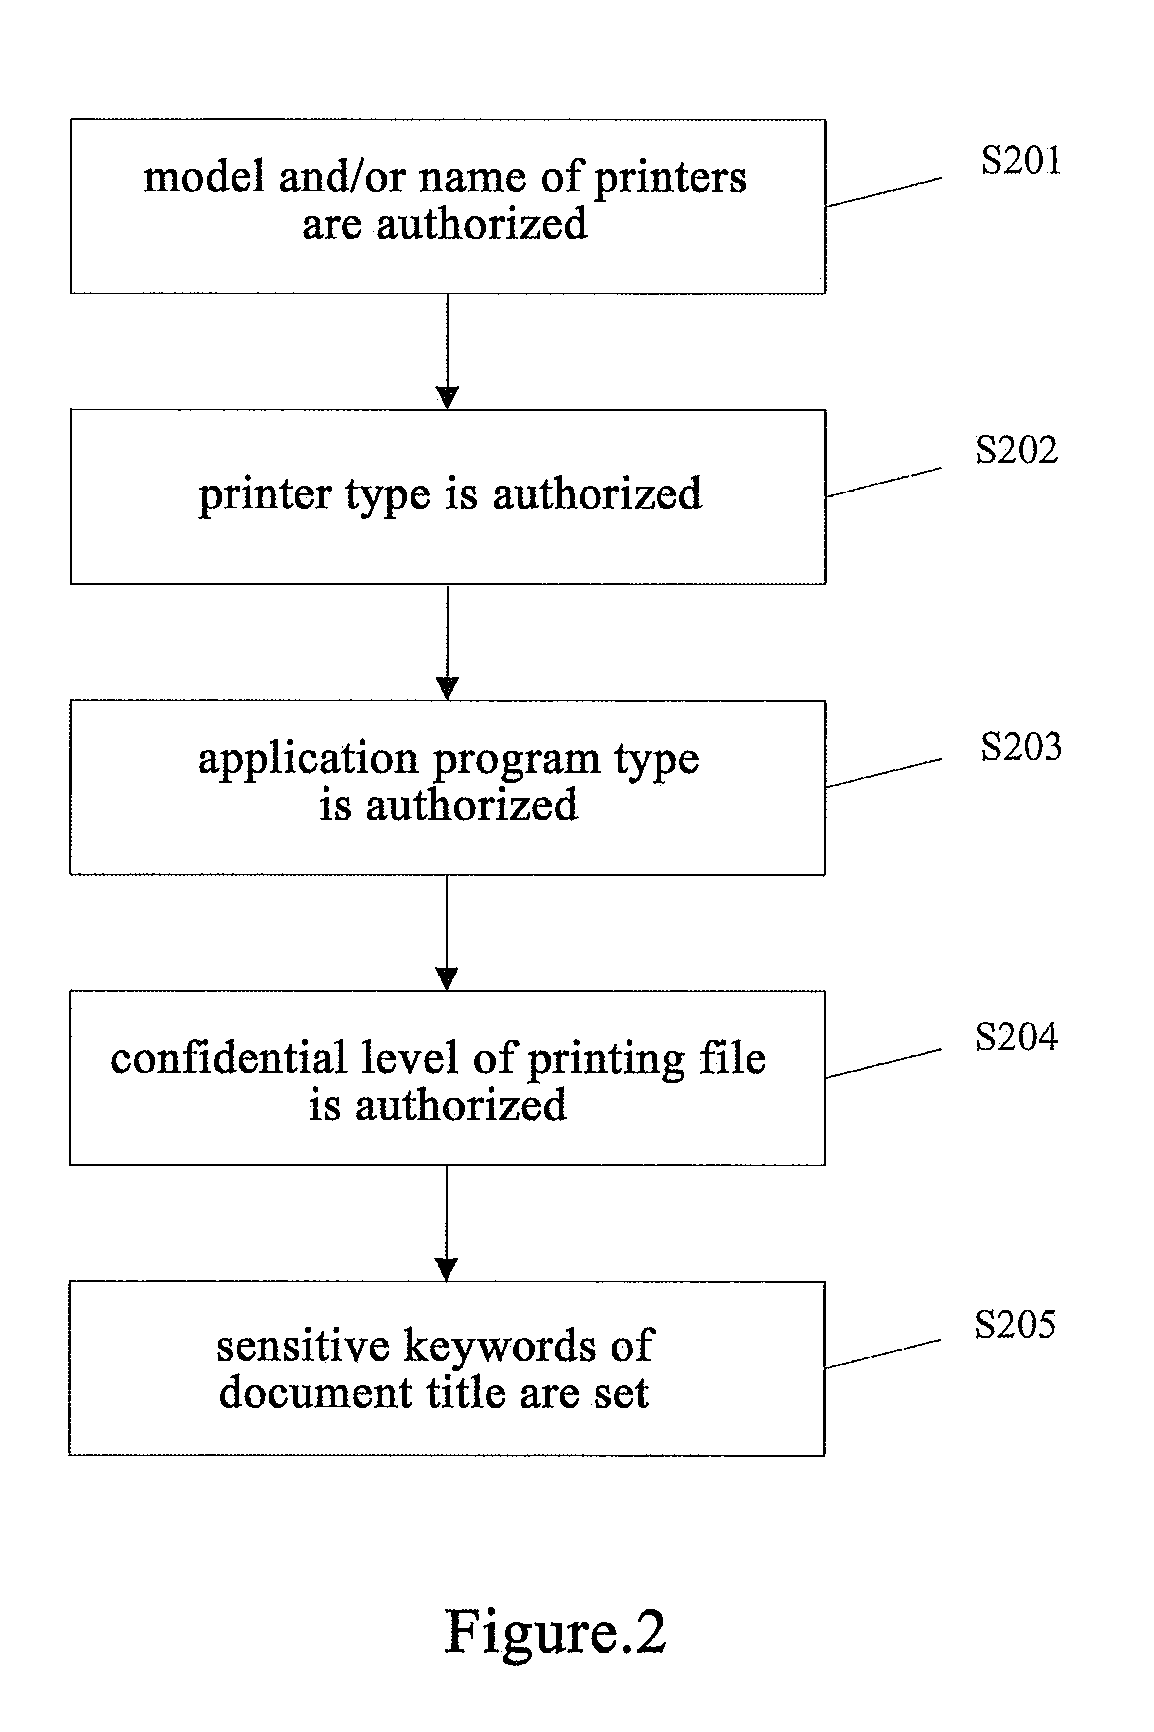 Method and system for document printing management and control, and document source tracking